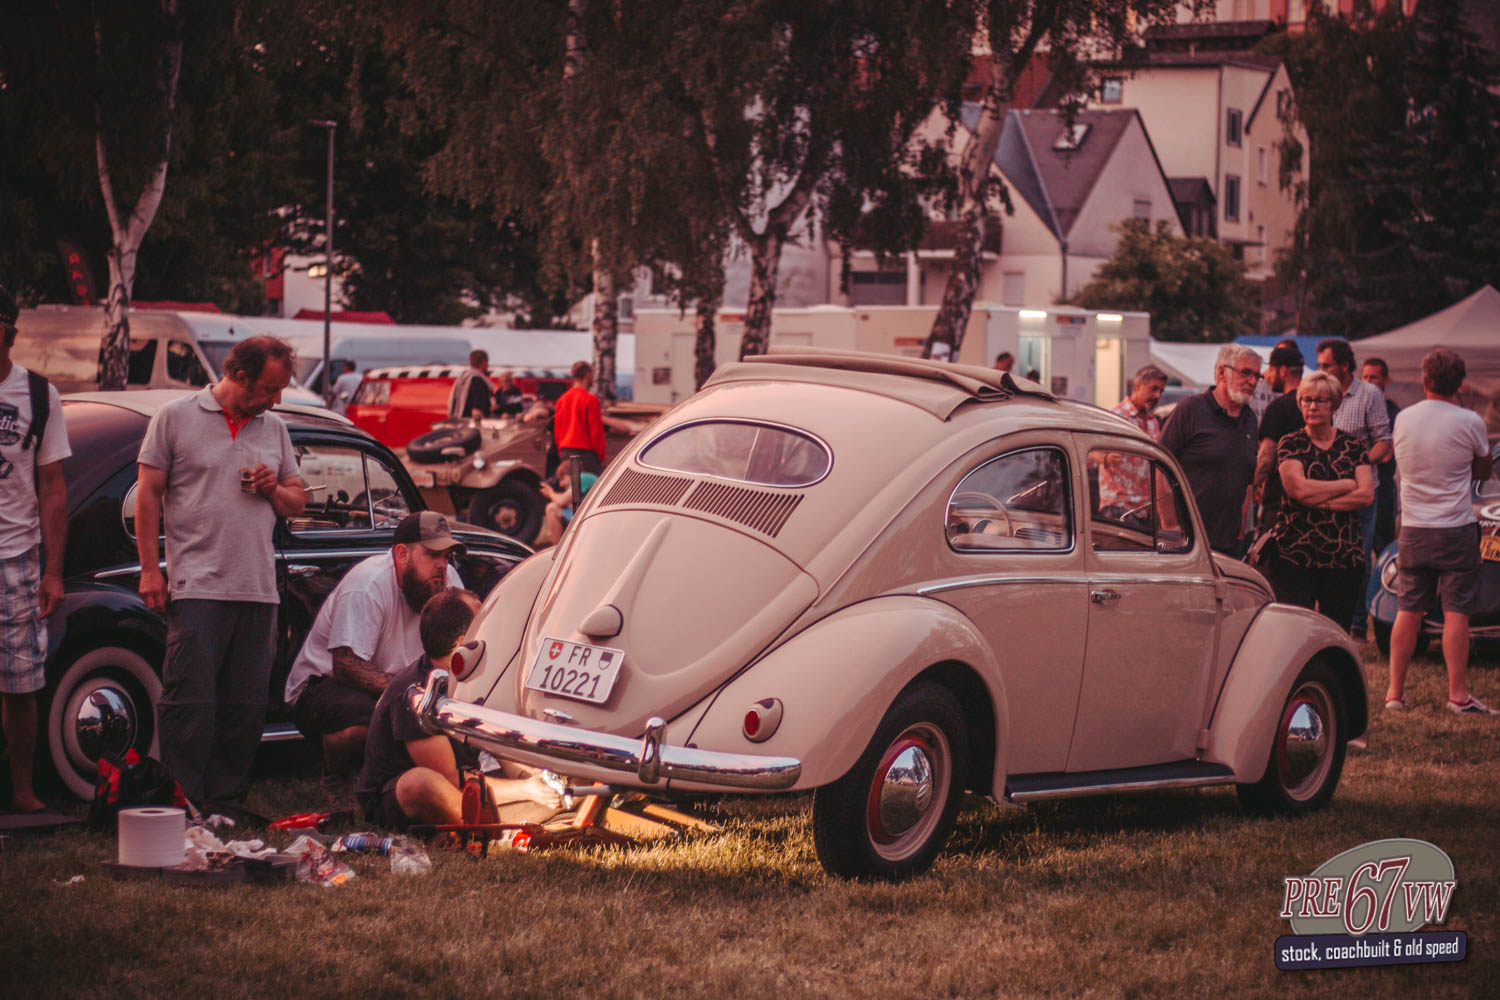 Fixing an Oval Sunroof Beetle at Bad Camberg 2019